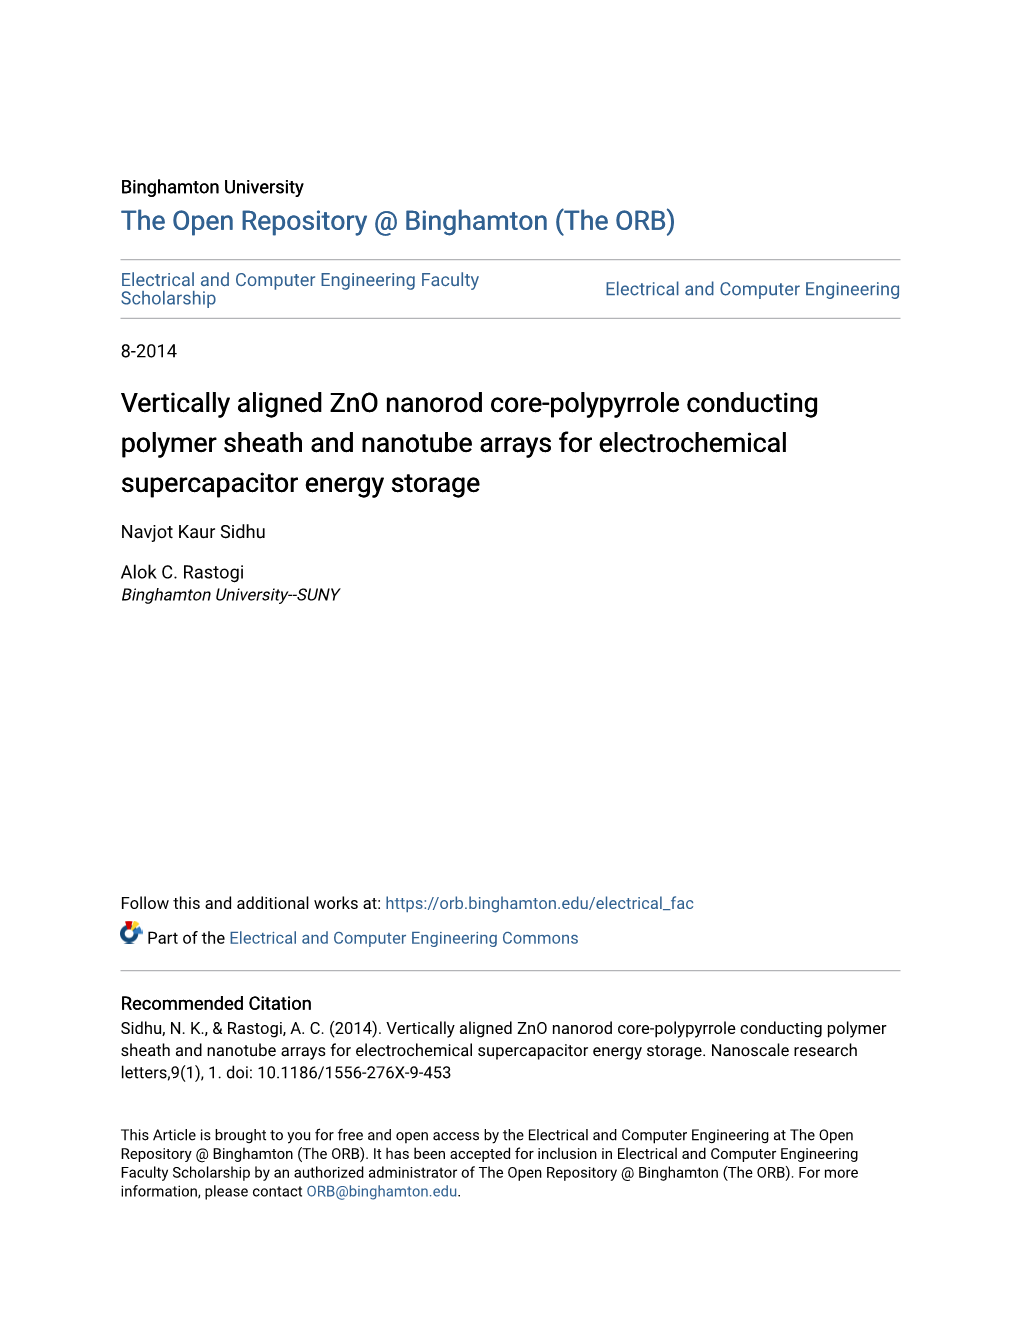 Vertically Aligned Zno Nanorod Core-Polypyrrole Conducting Polymer Sheath and Nanotube Arrays for Electrochemical Supercapacitor Energy Storage